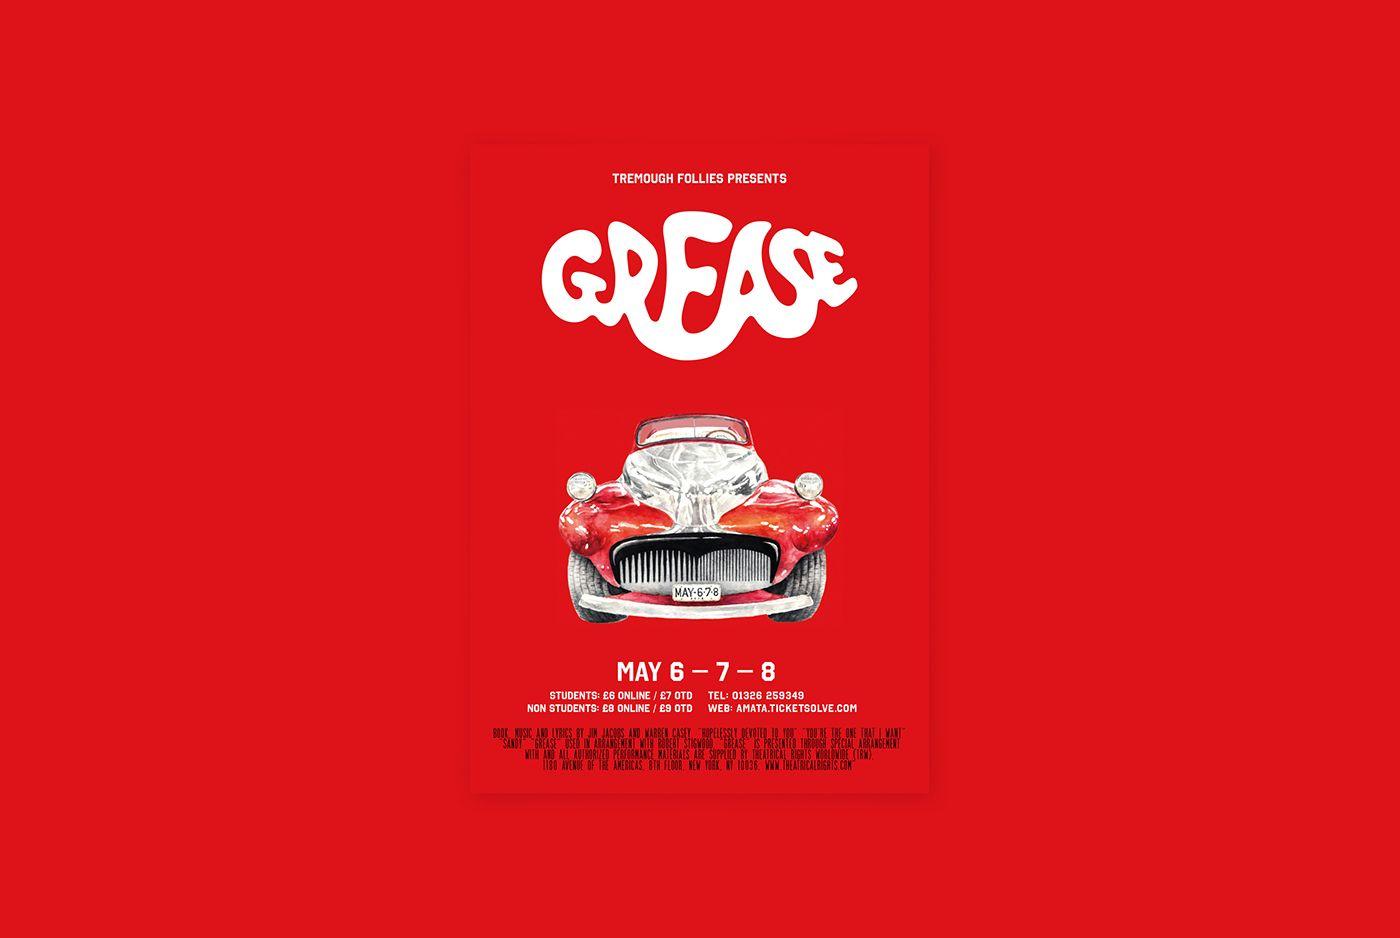 Grease Logo - Grease Musical on Behance